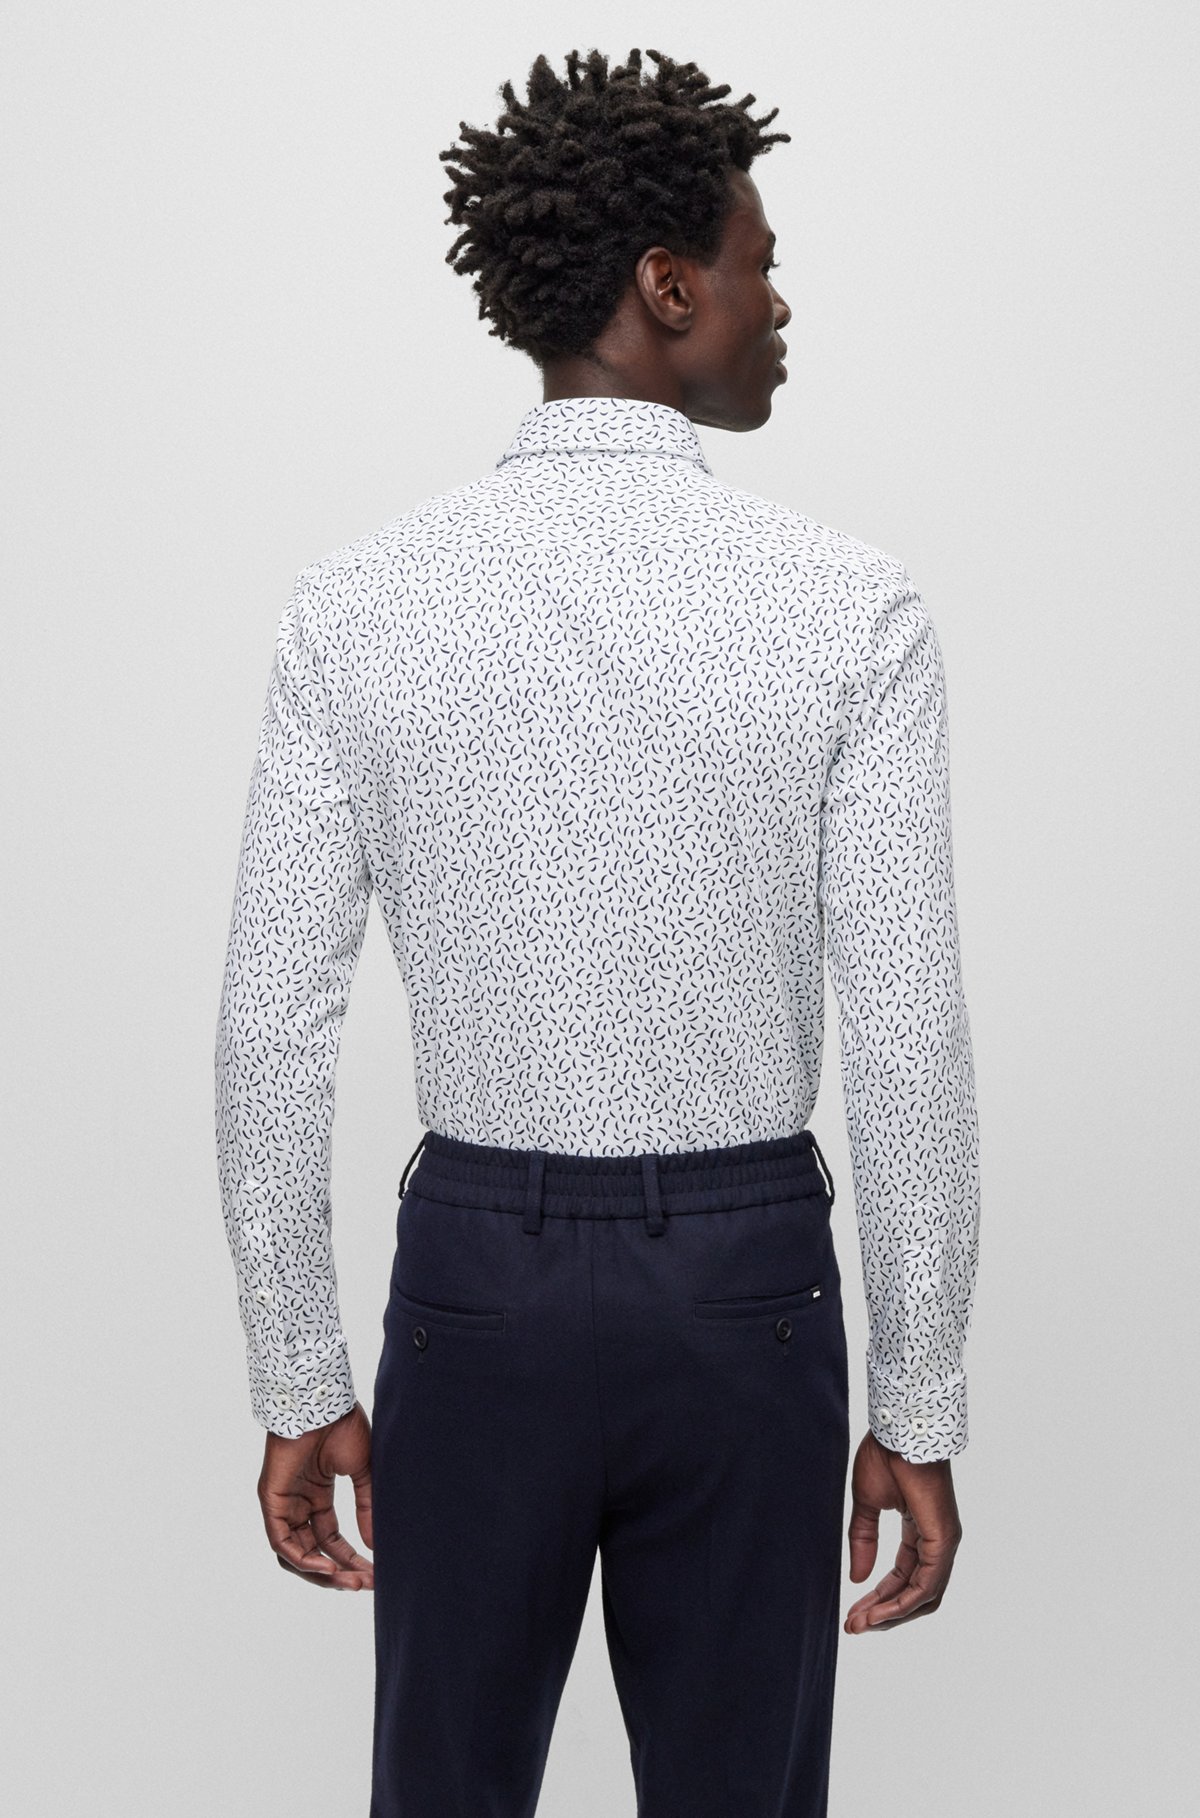 Slim-fit shirt in a printed cotton blend, White